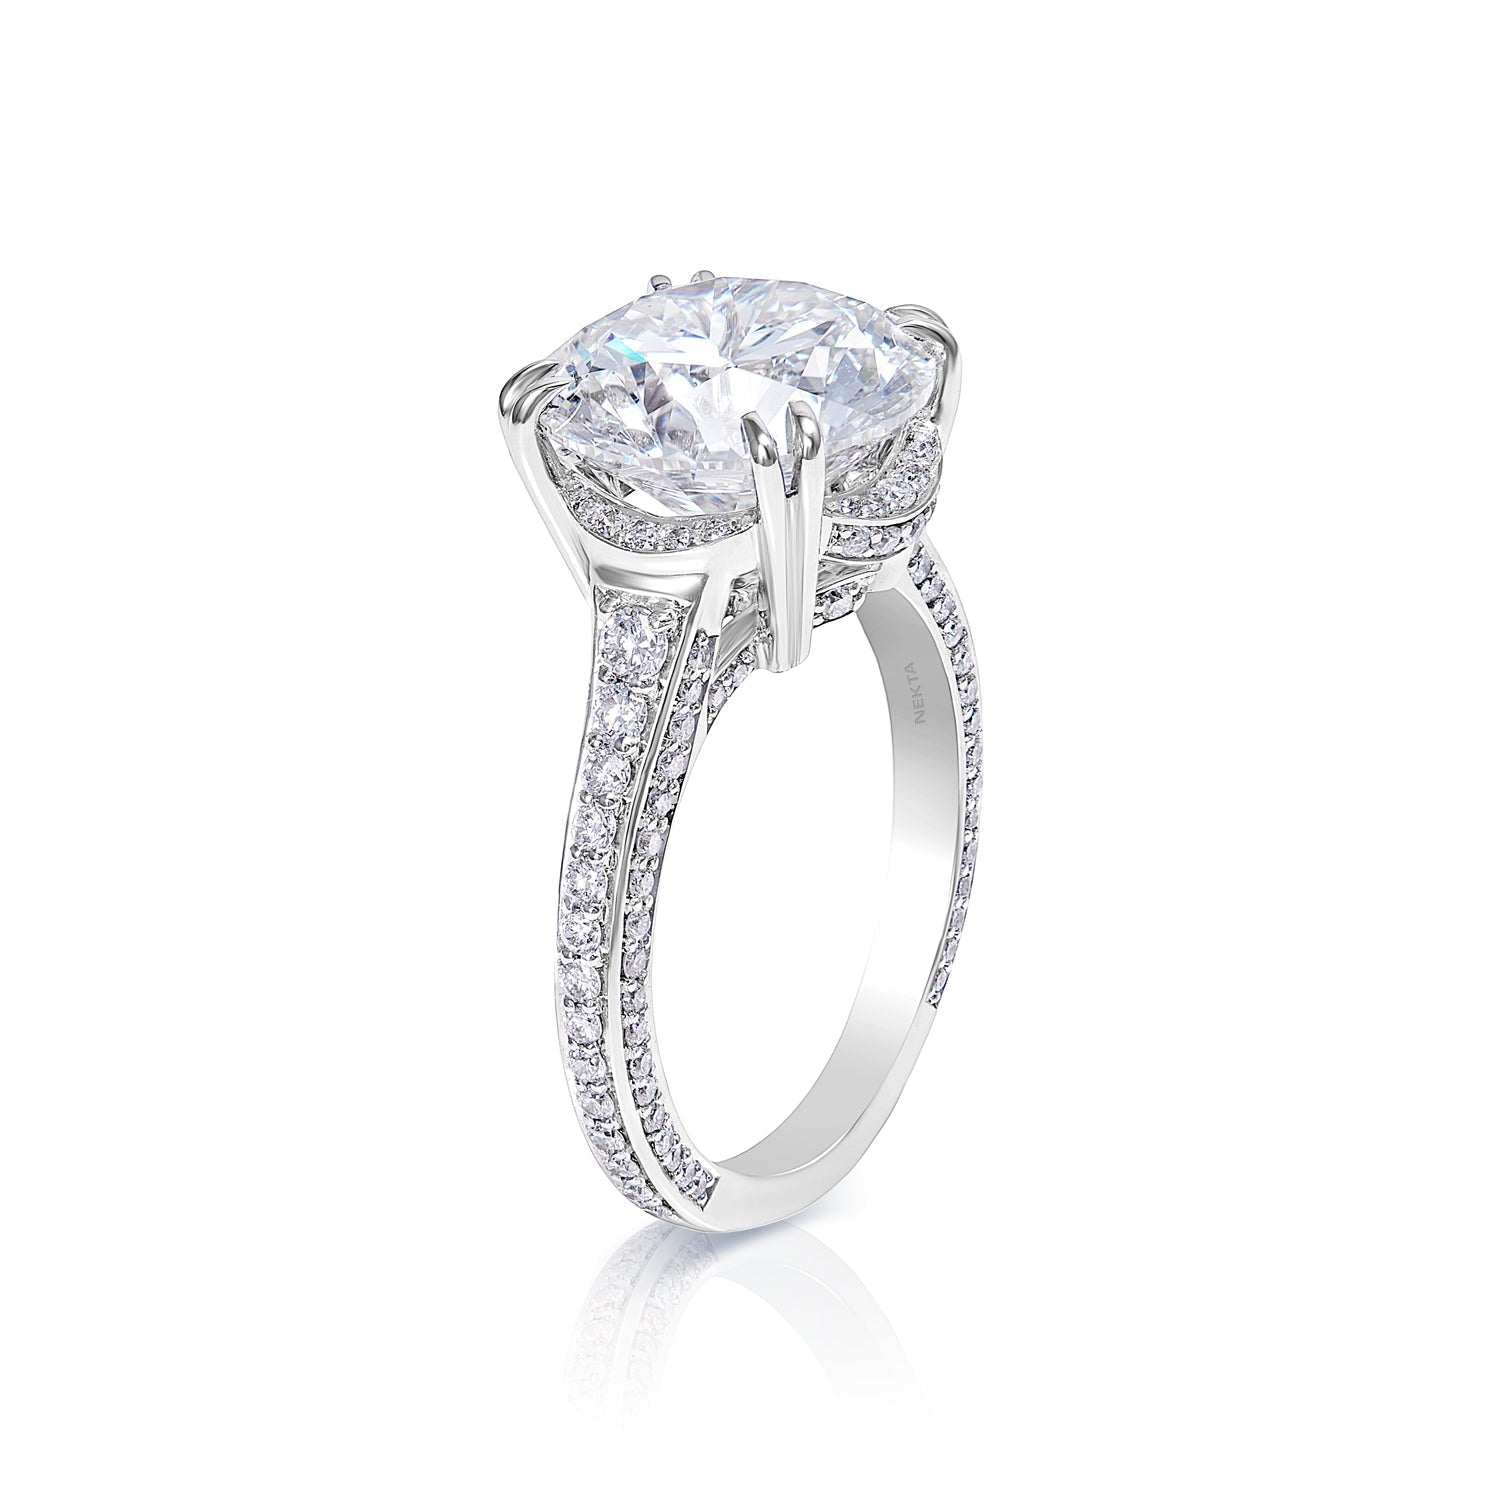 Lian 6 Carat G VS1 Round Cut Lab-Grown Diamond Engagement Ring in 18k White Gold Side View